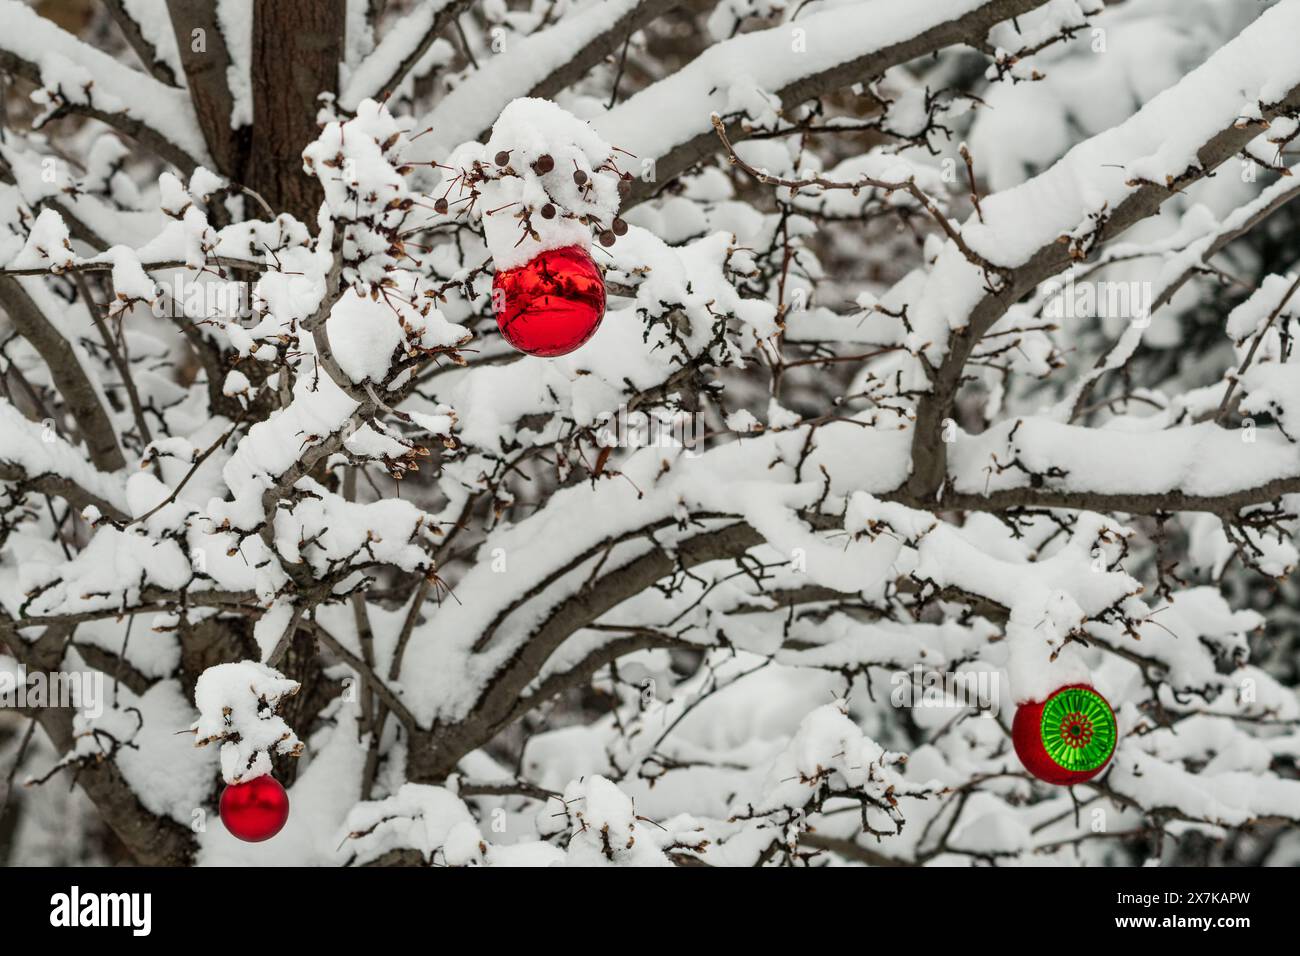 A close-up of a snow-covered tree decorated with red Christmas ornaments in Boise, ID, USA during winter. Stock Photo